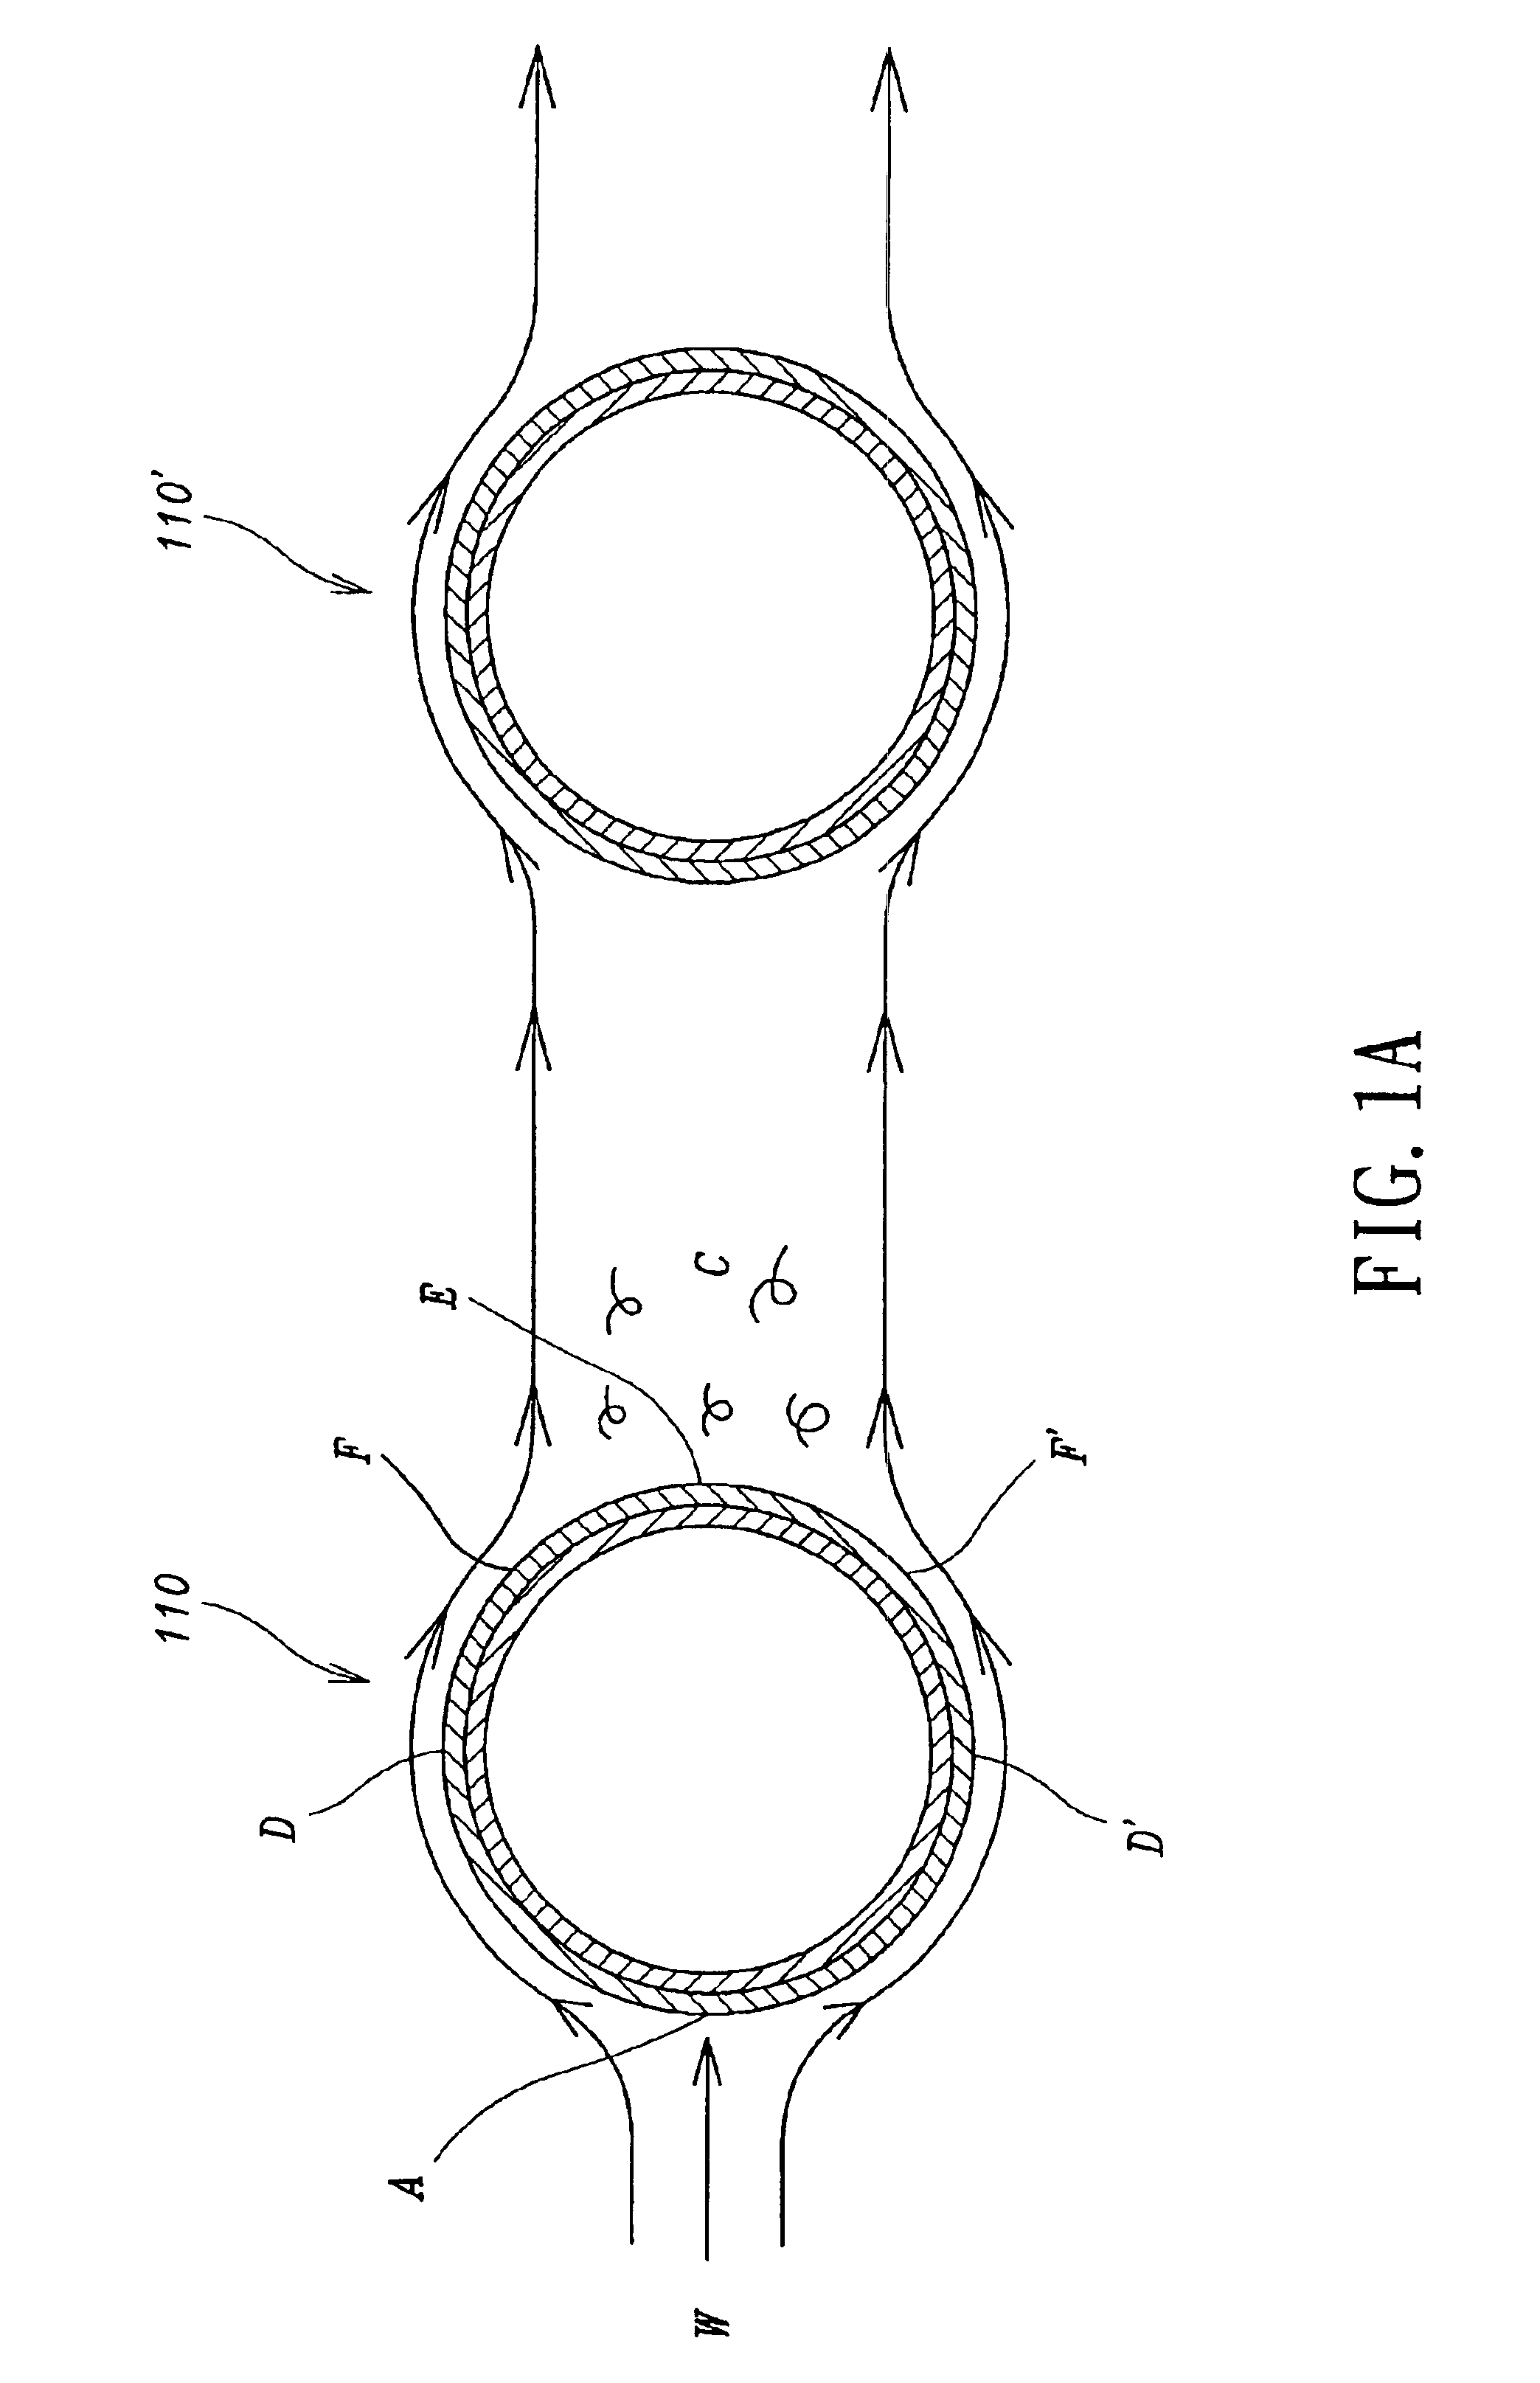 Evaporative condenser without cooling fins